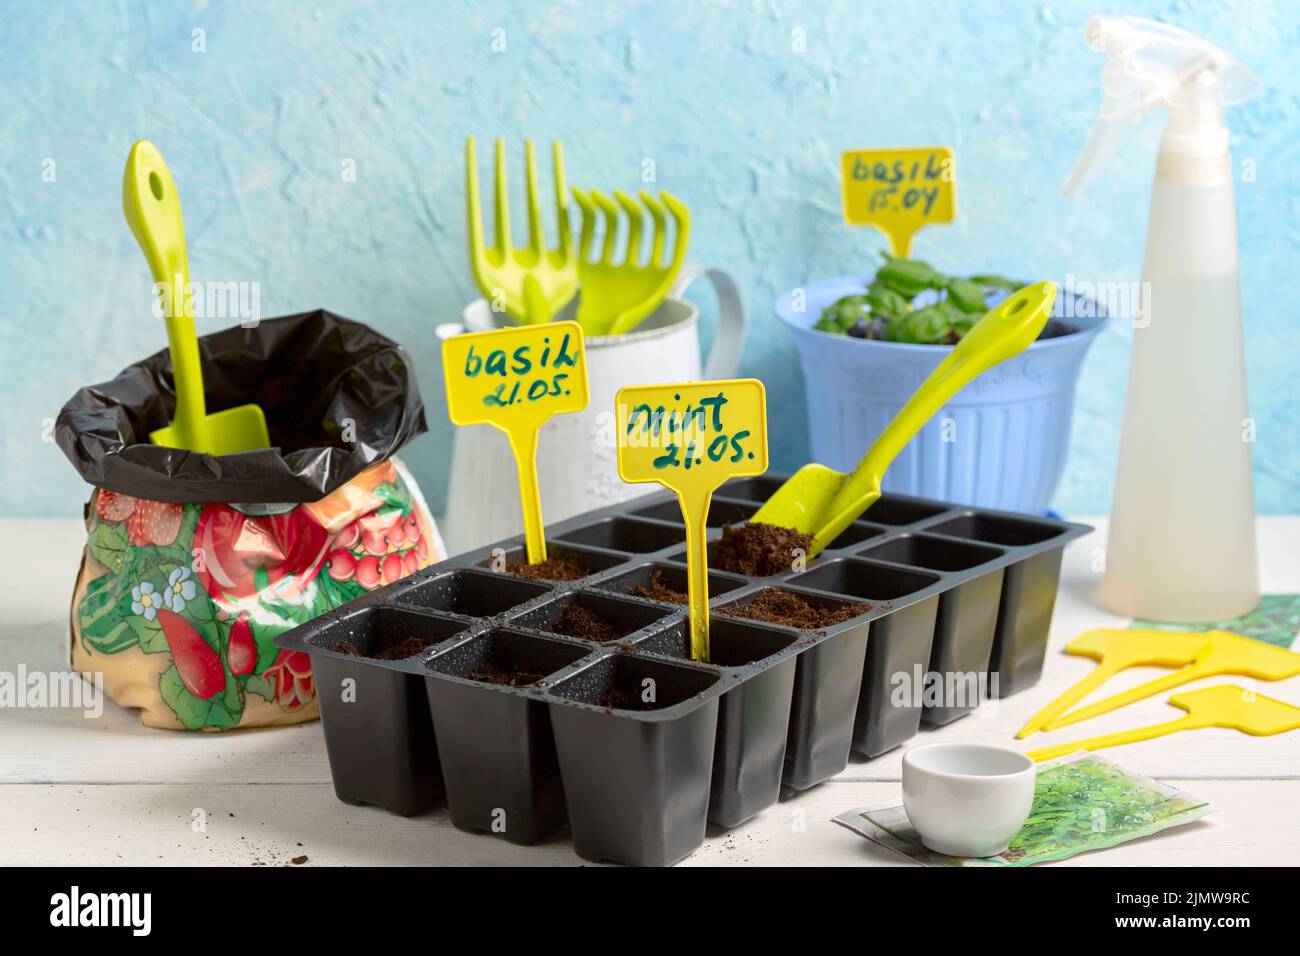 Tray with pots for seeds for sprouting herbs. Stock Photo